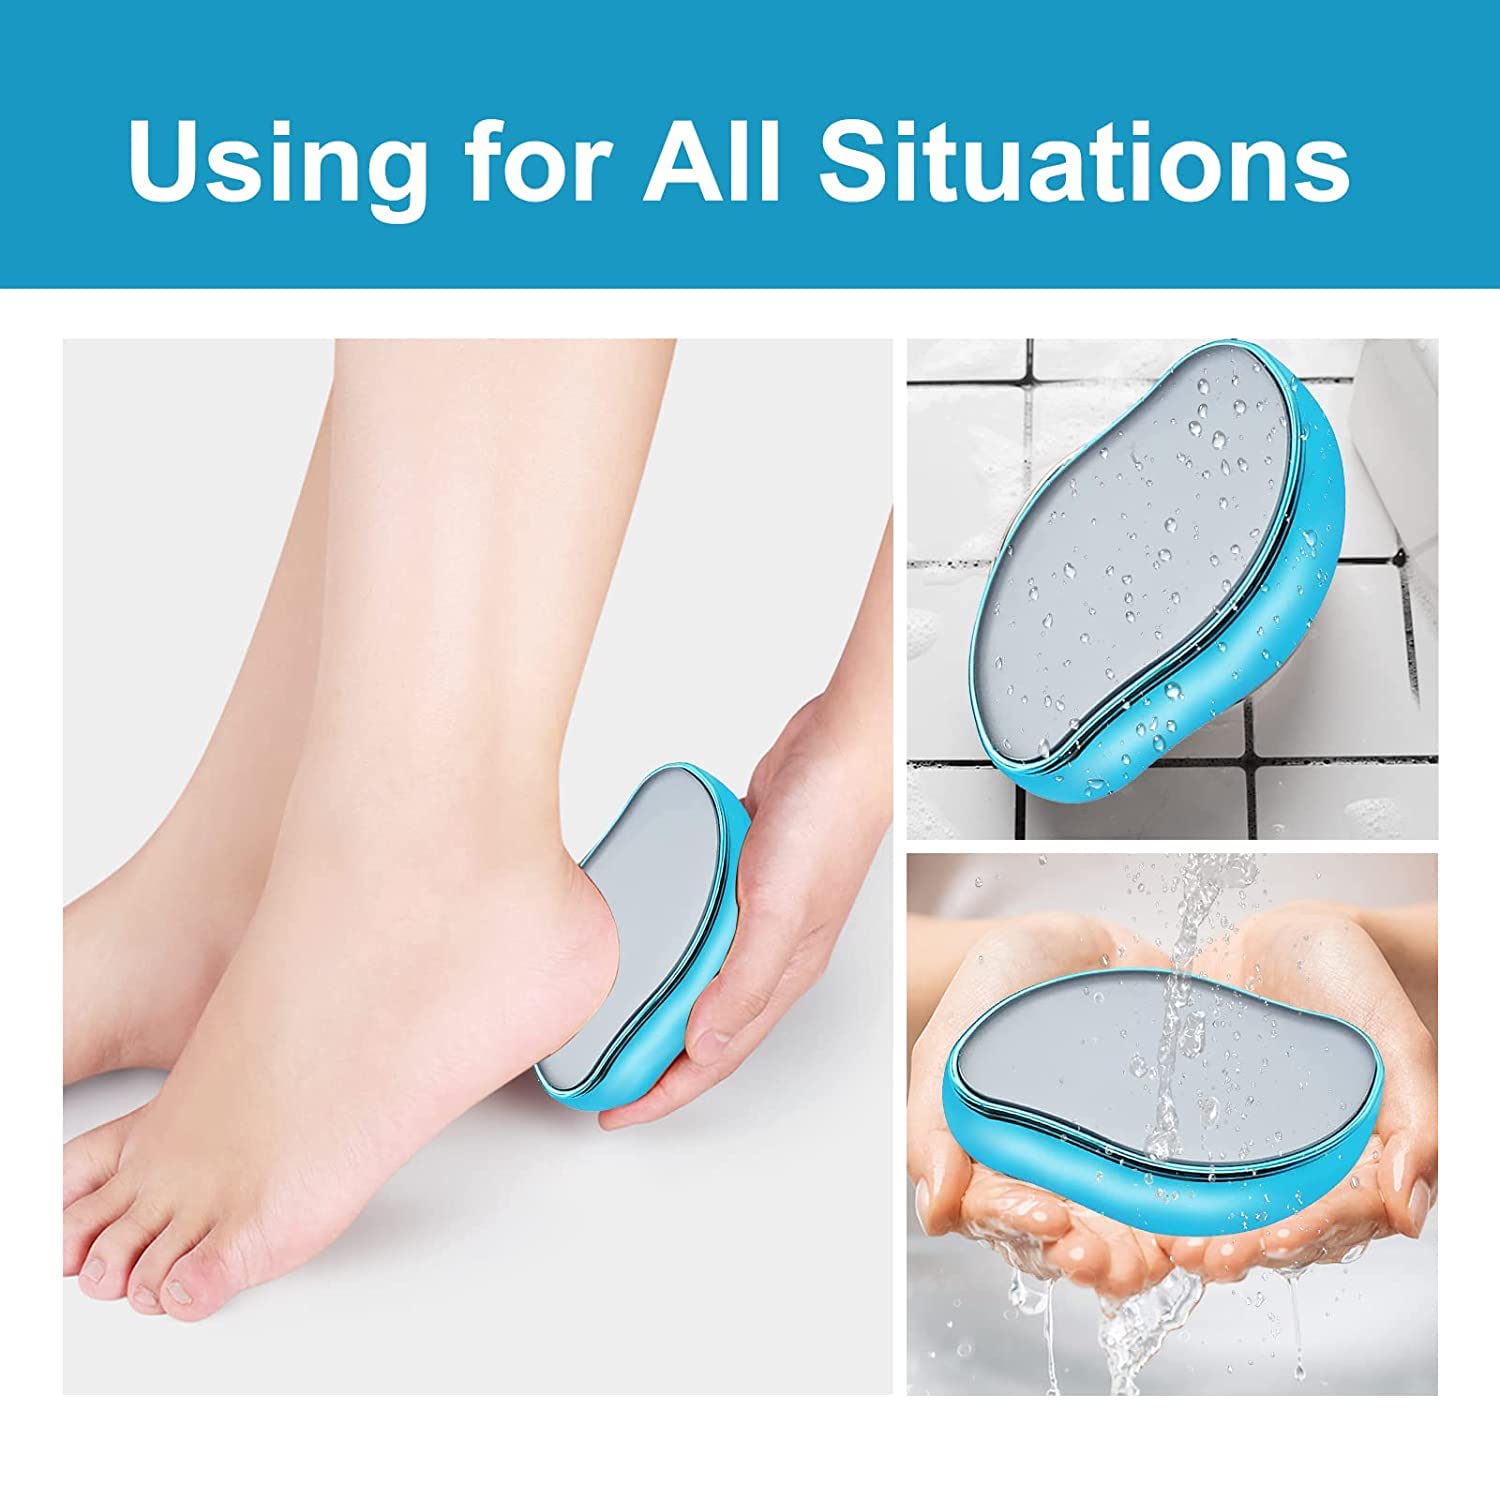 Crystal Hair Eraser & Women and Men, Magic Hair Eraser Crystal Hair Remover, Painless Exfoliation Hair Removal Tool for Arms Legs Back - Reusable and Washable, Stone Hair Remover